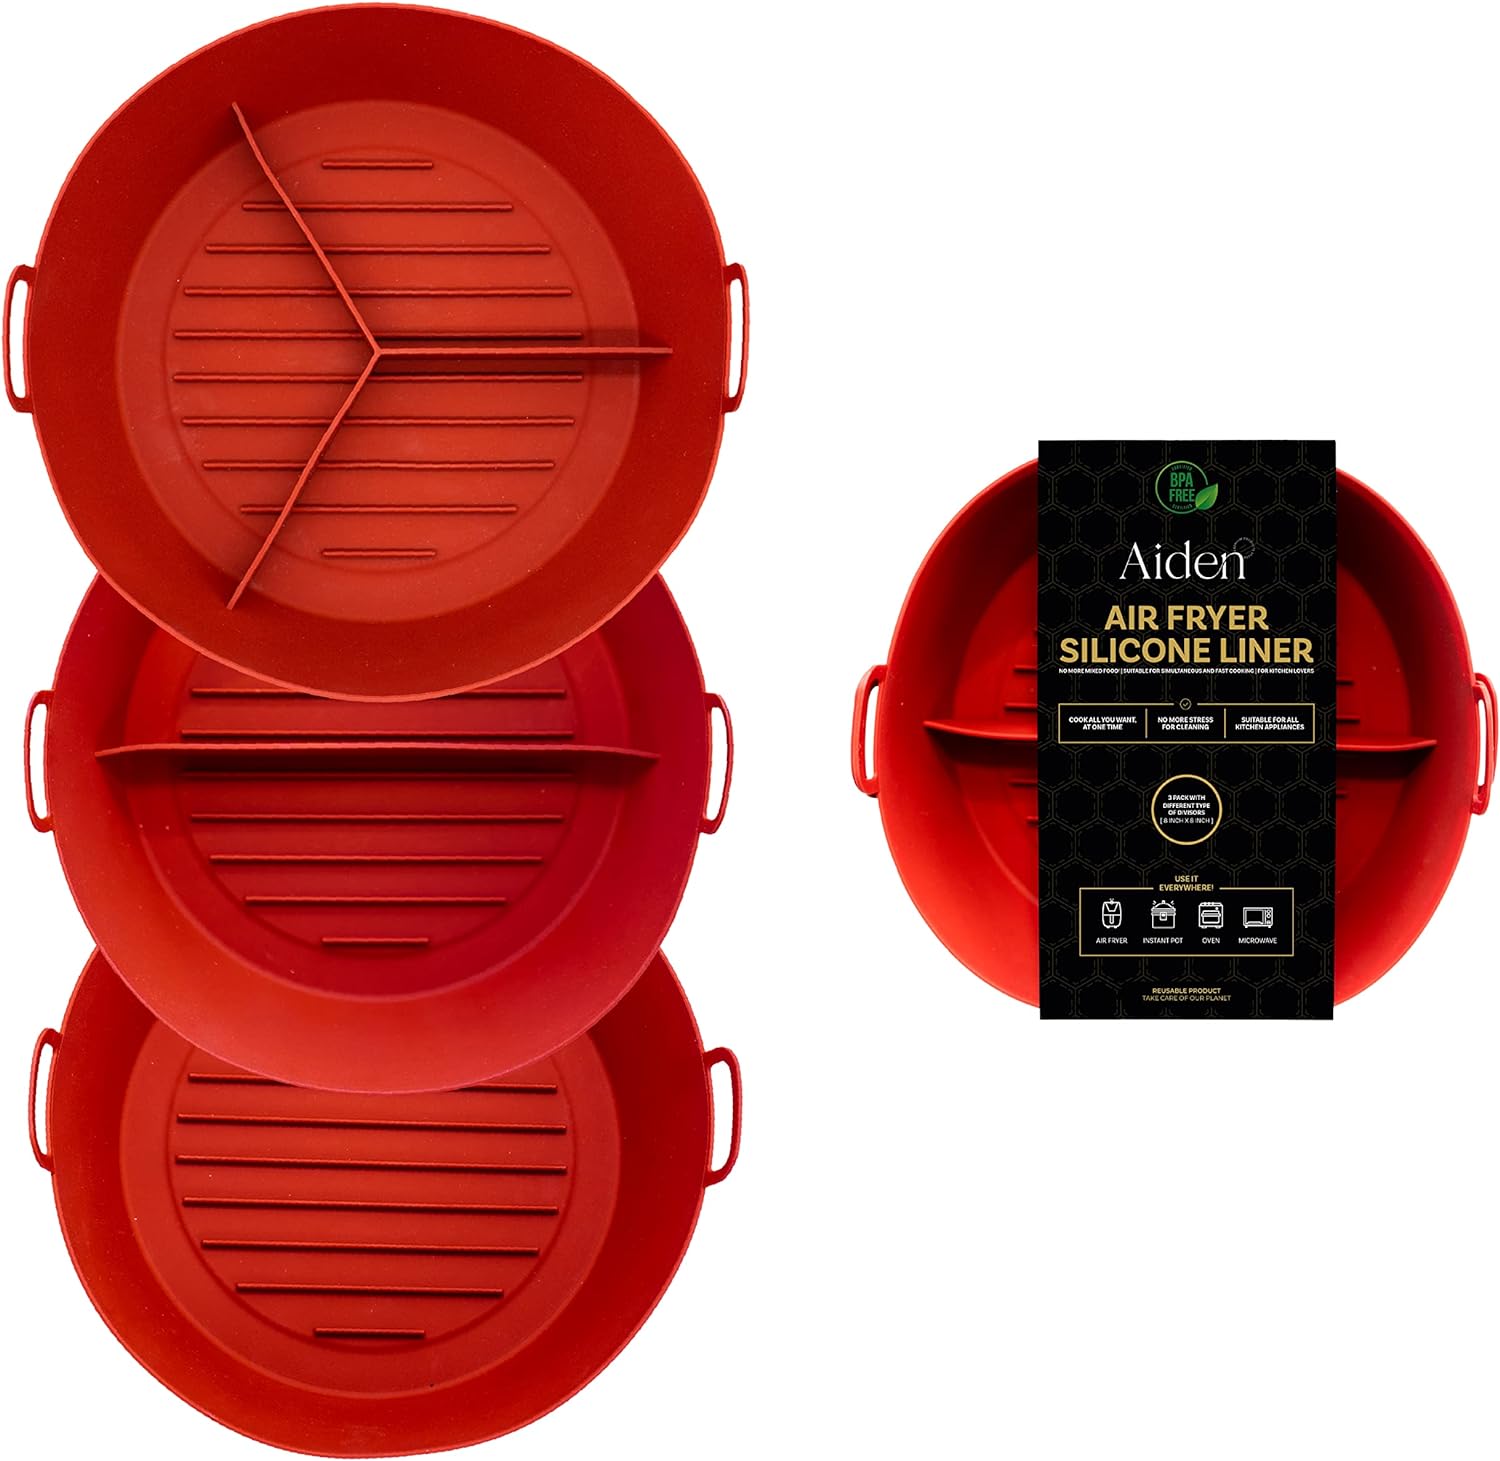 AIDEN – 3 pack Air Fryer Silicone Liners with Food Dividers I Reusable Oven & Kitchen accessories (8 inch) Safe Liner Heat Resistant BPA FREE I Deep Fryer Parts Non Stick Easy Cleaning & Dishwashable